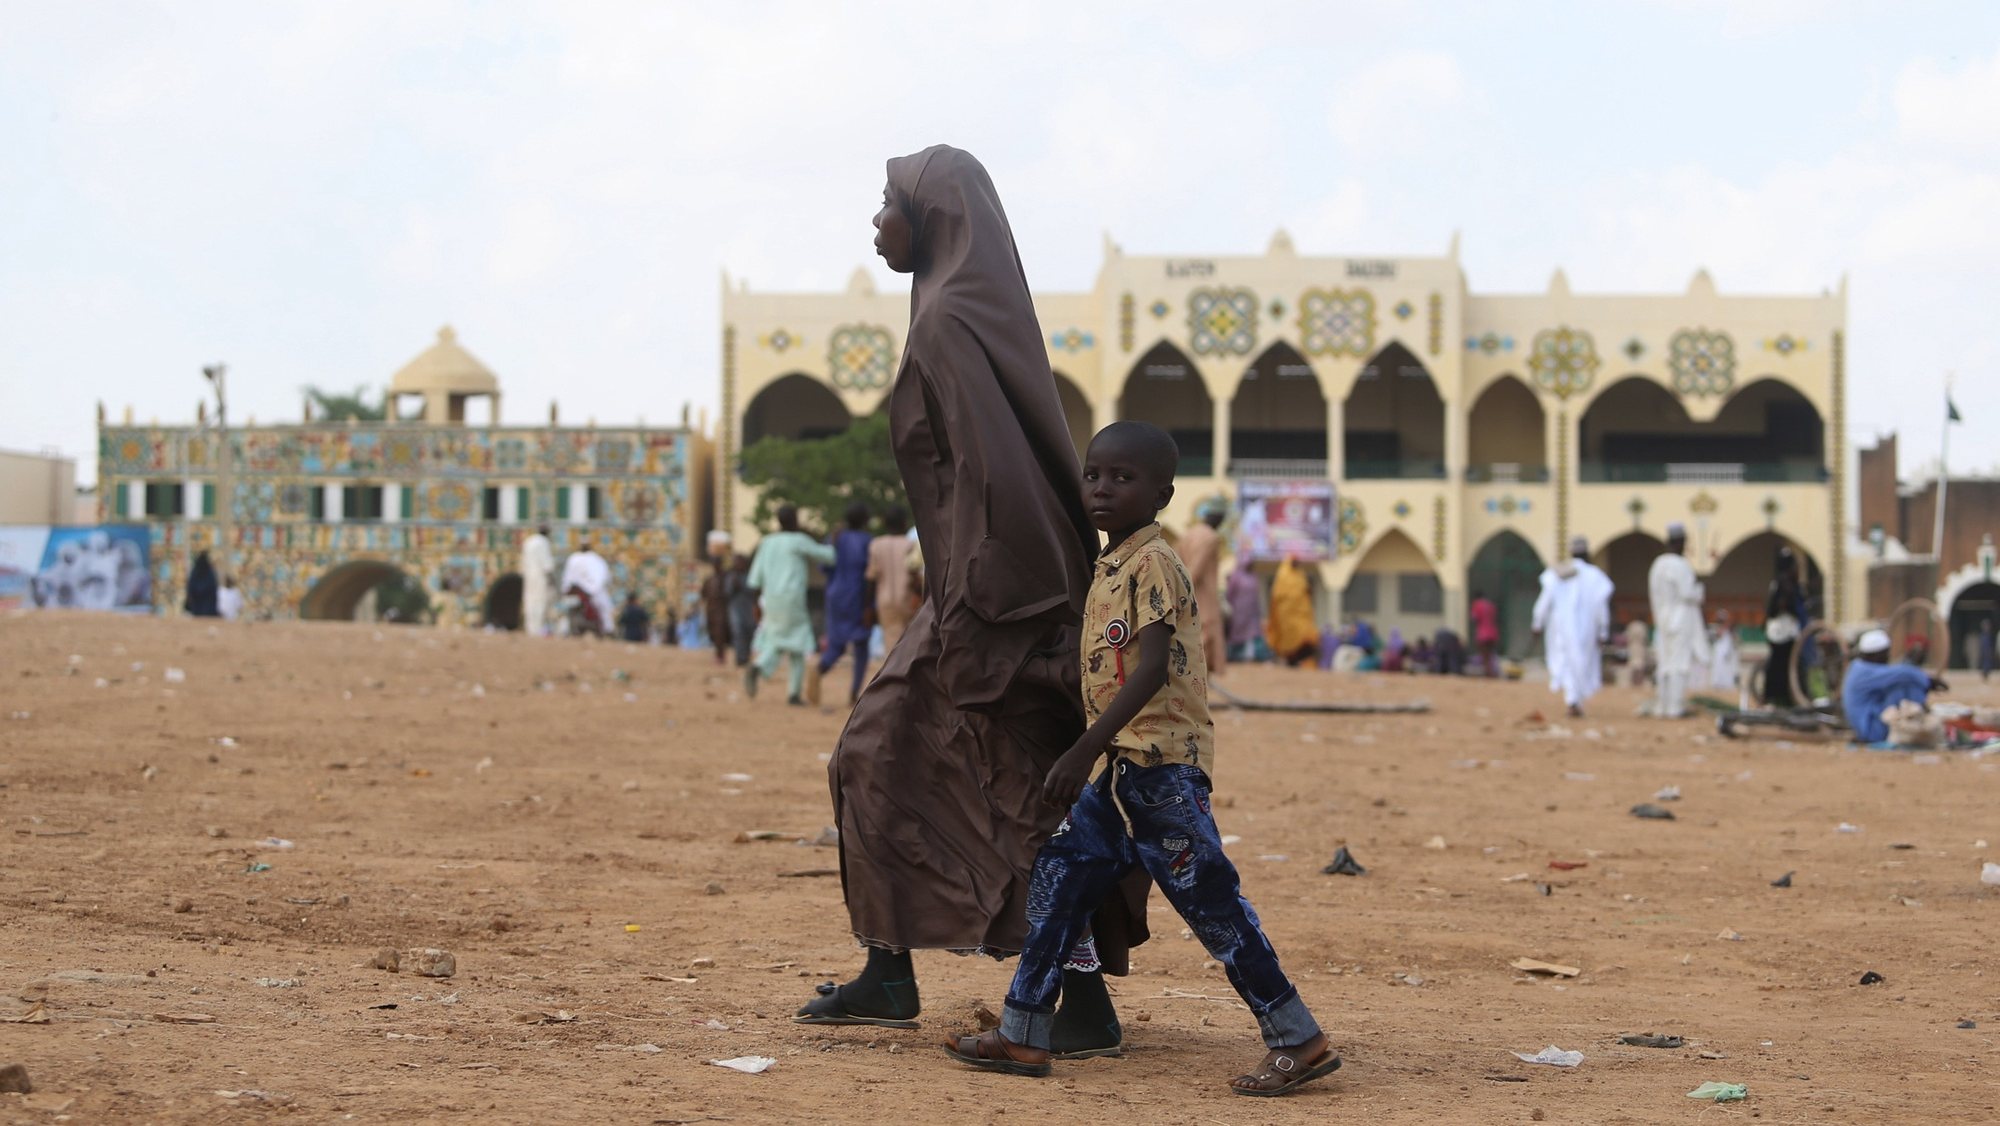 epa09200615 A Muslim woman walks past with her child in front of the Emir of Zaria&#039;s palace in northern Nigeria 14 May 2021. Muslims around the world are celebrating Eid al-Fitr, the three day festival marking the end of the Muslim holy fasting month of Ramadan. Eid al-Fitr is one of the two major holidays in Islam.  EPA/AKINTUNDE AKINLEYE